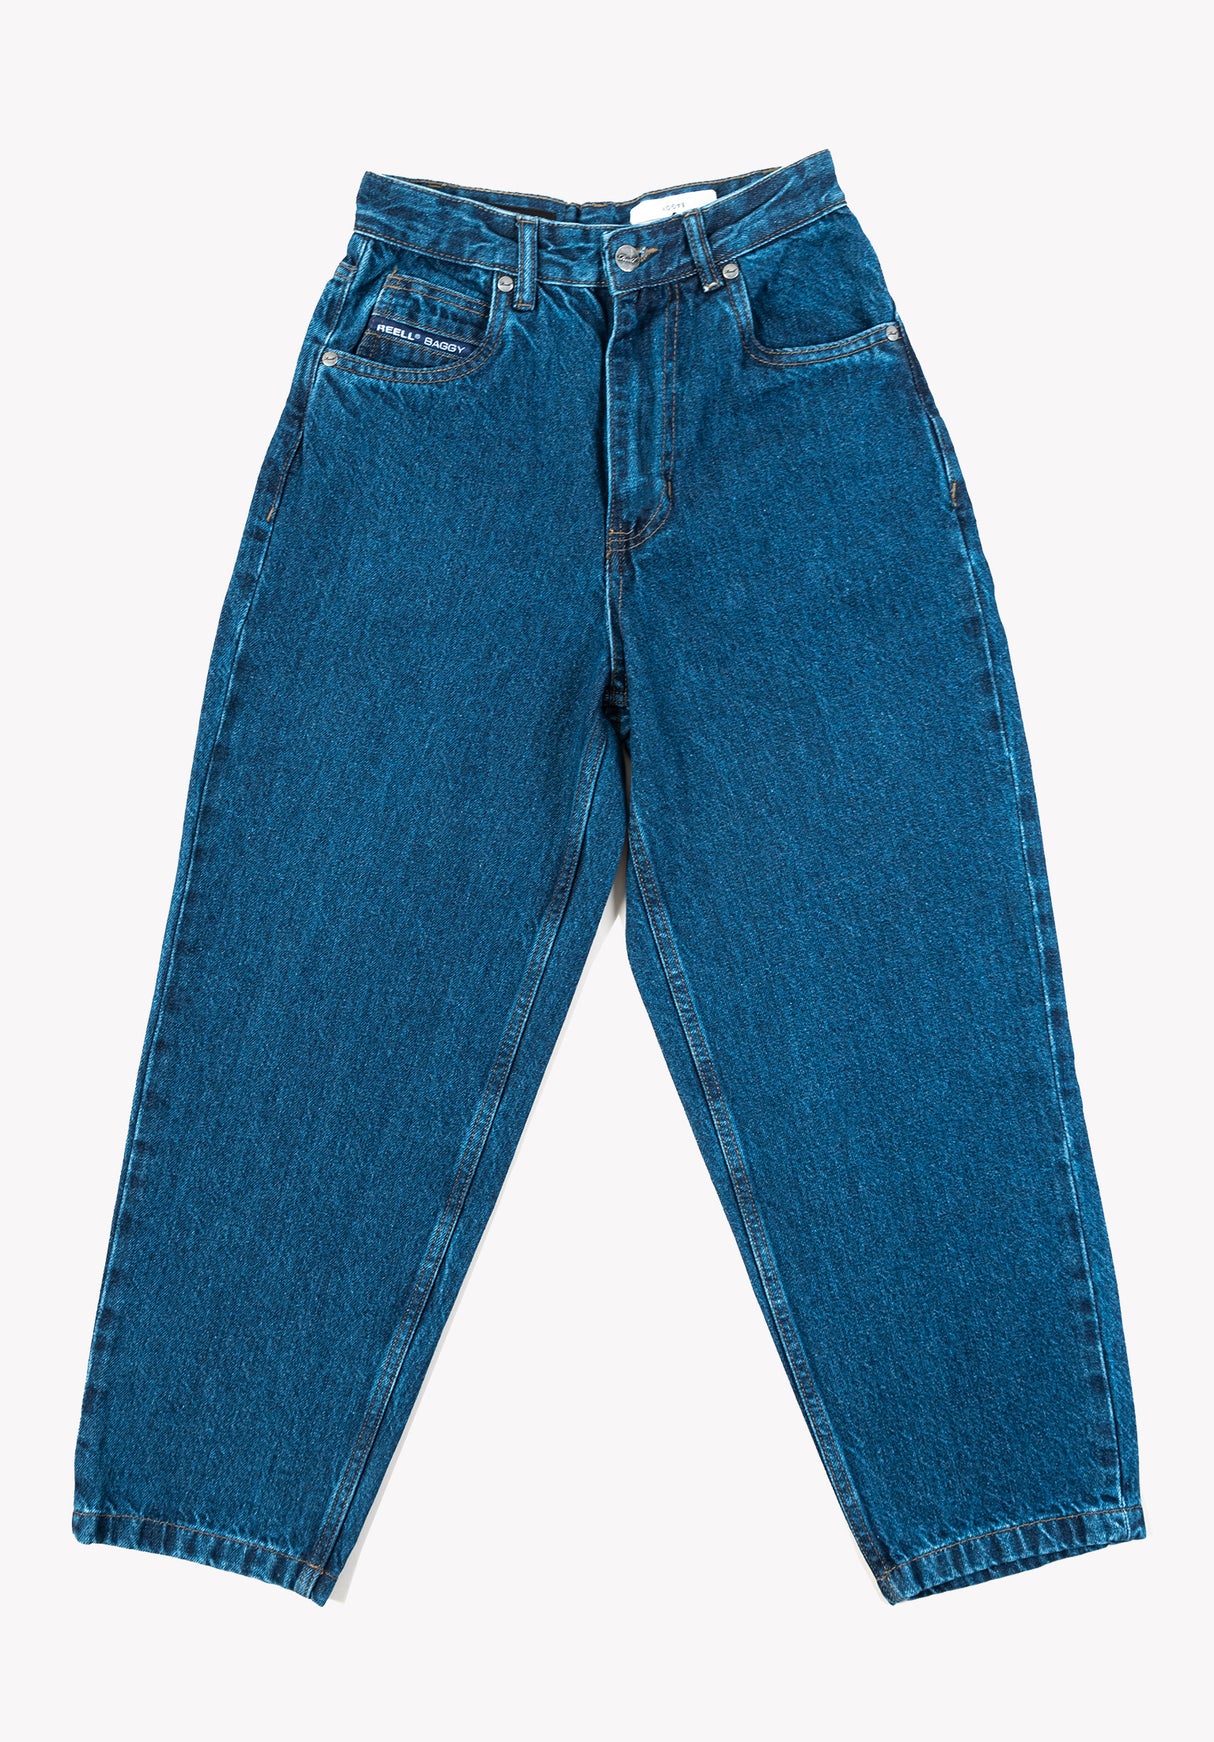 REELL Baggy Jeans - Buy now